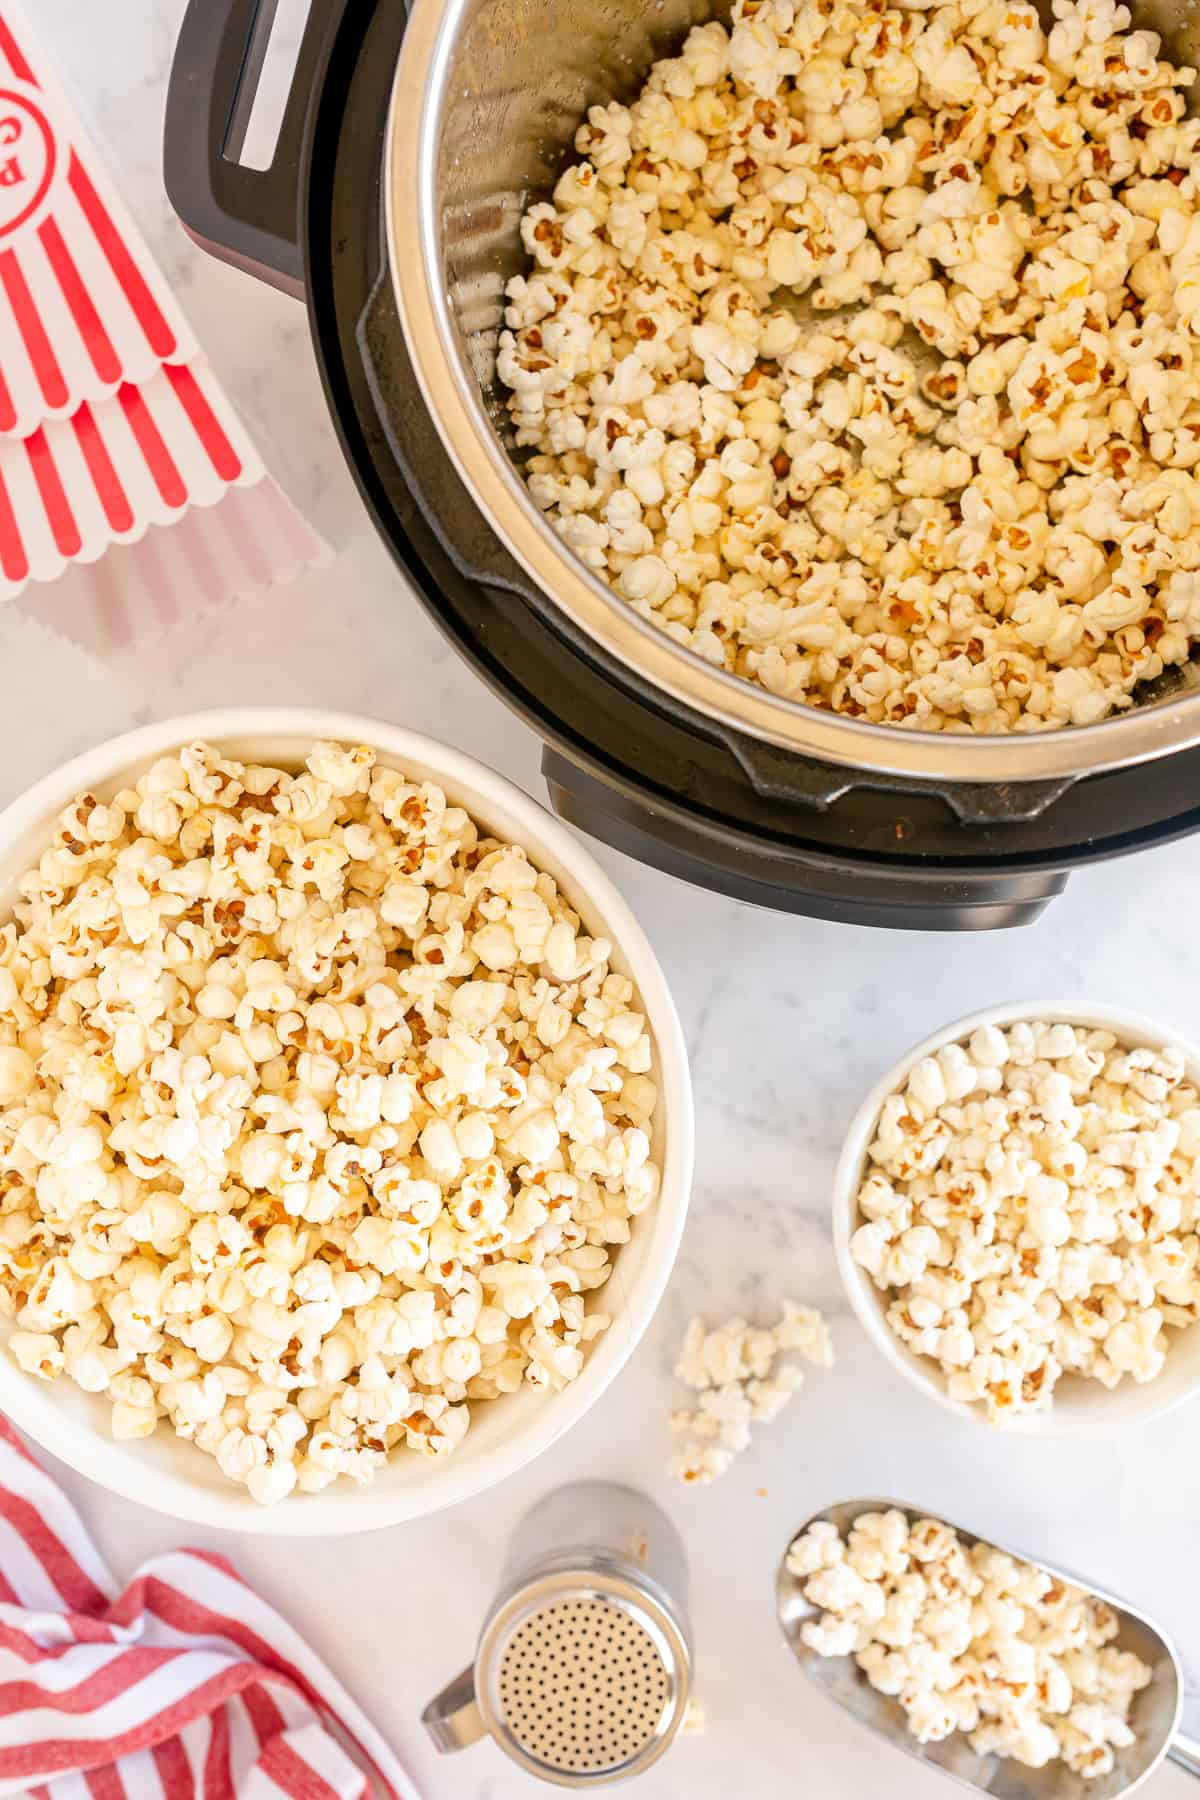 An Instant Pot and bowls filled with popcorn shot from over the top.